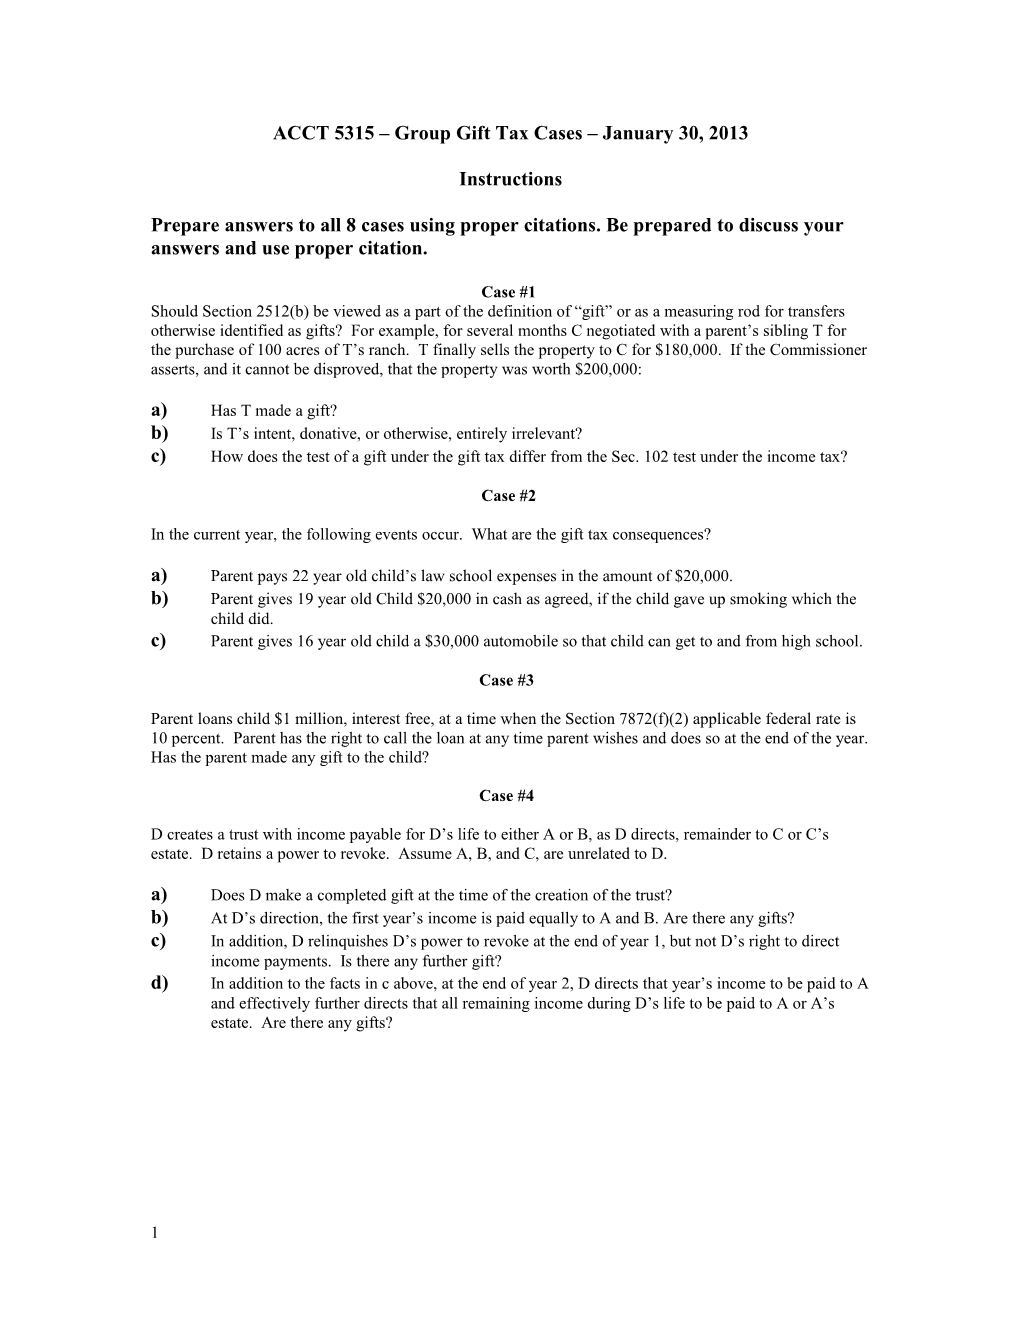 ACCT 5315 Gift Tax Group Assignment